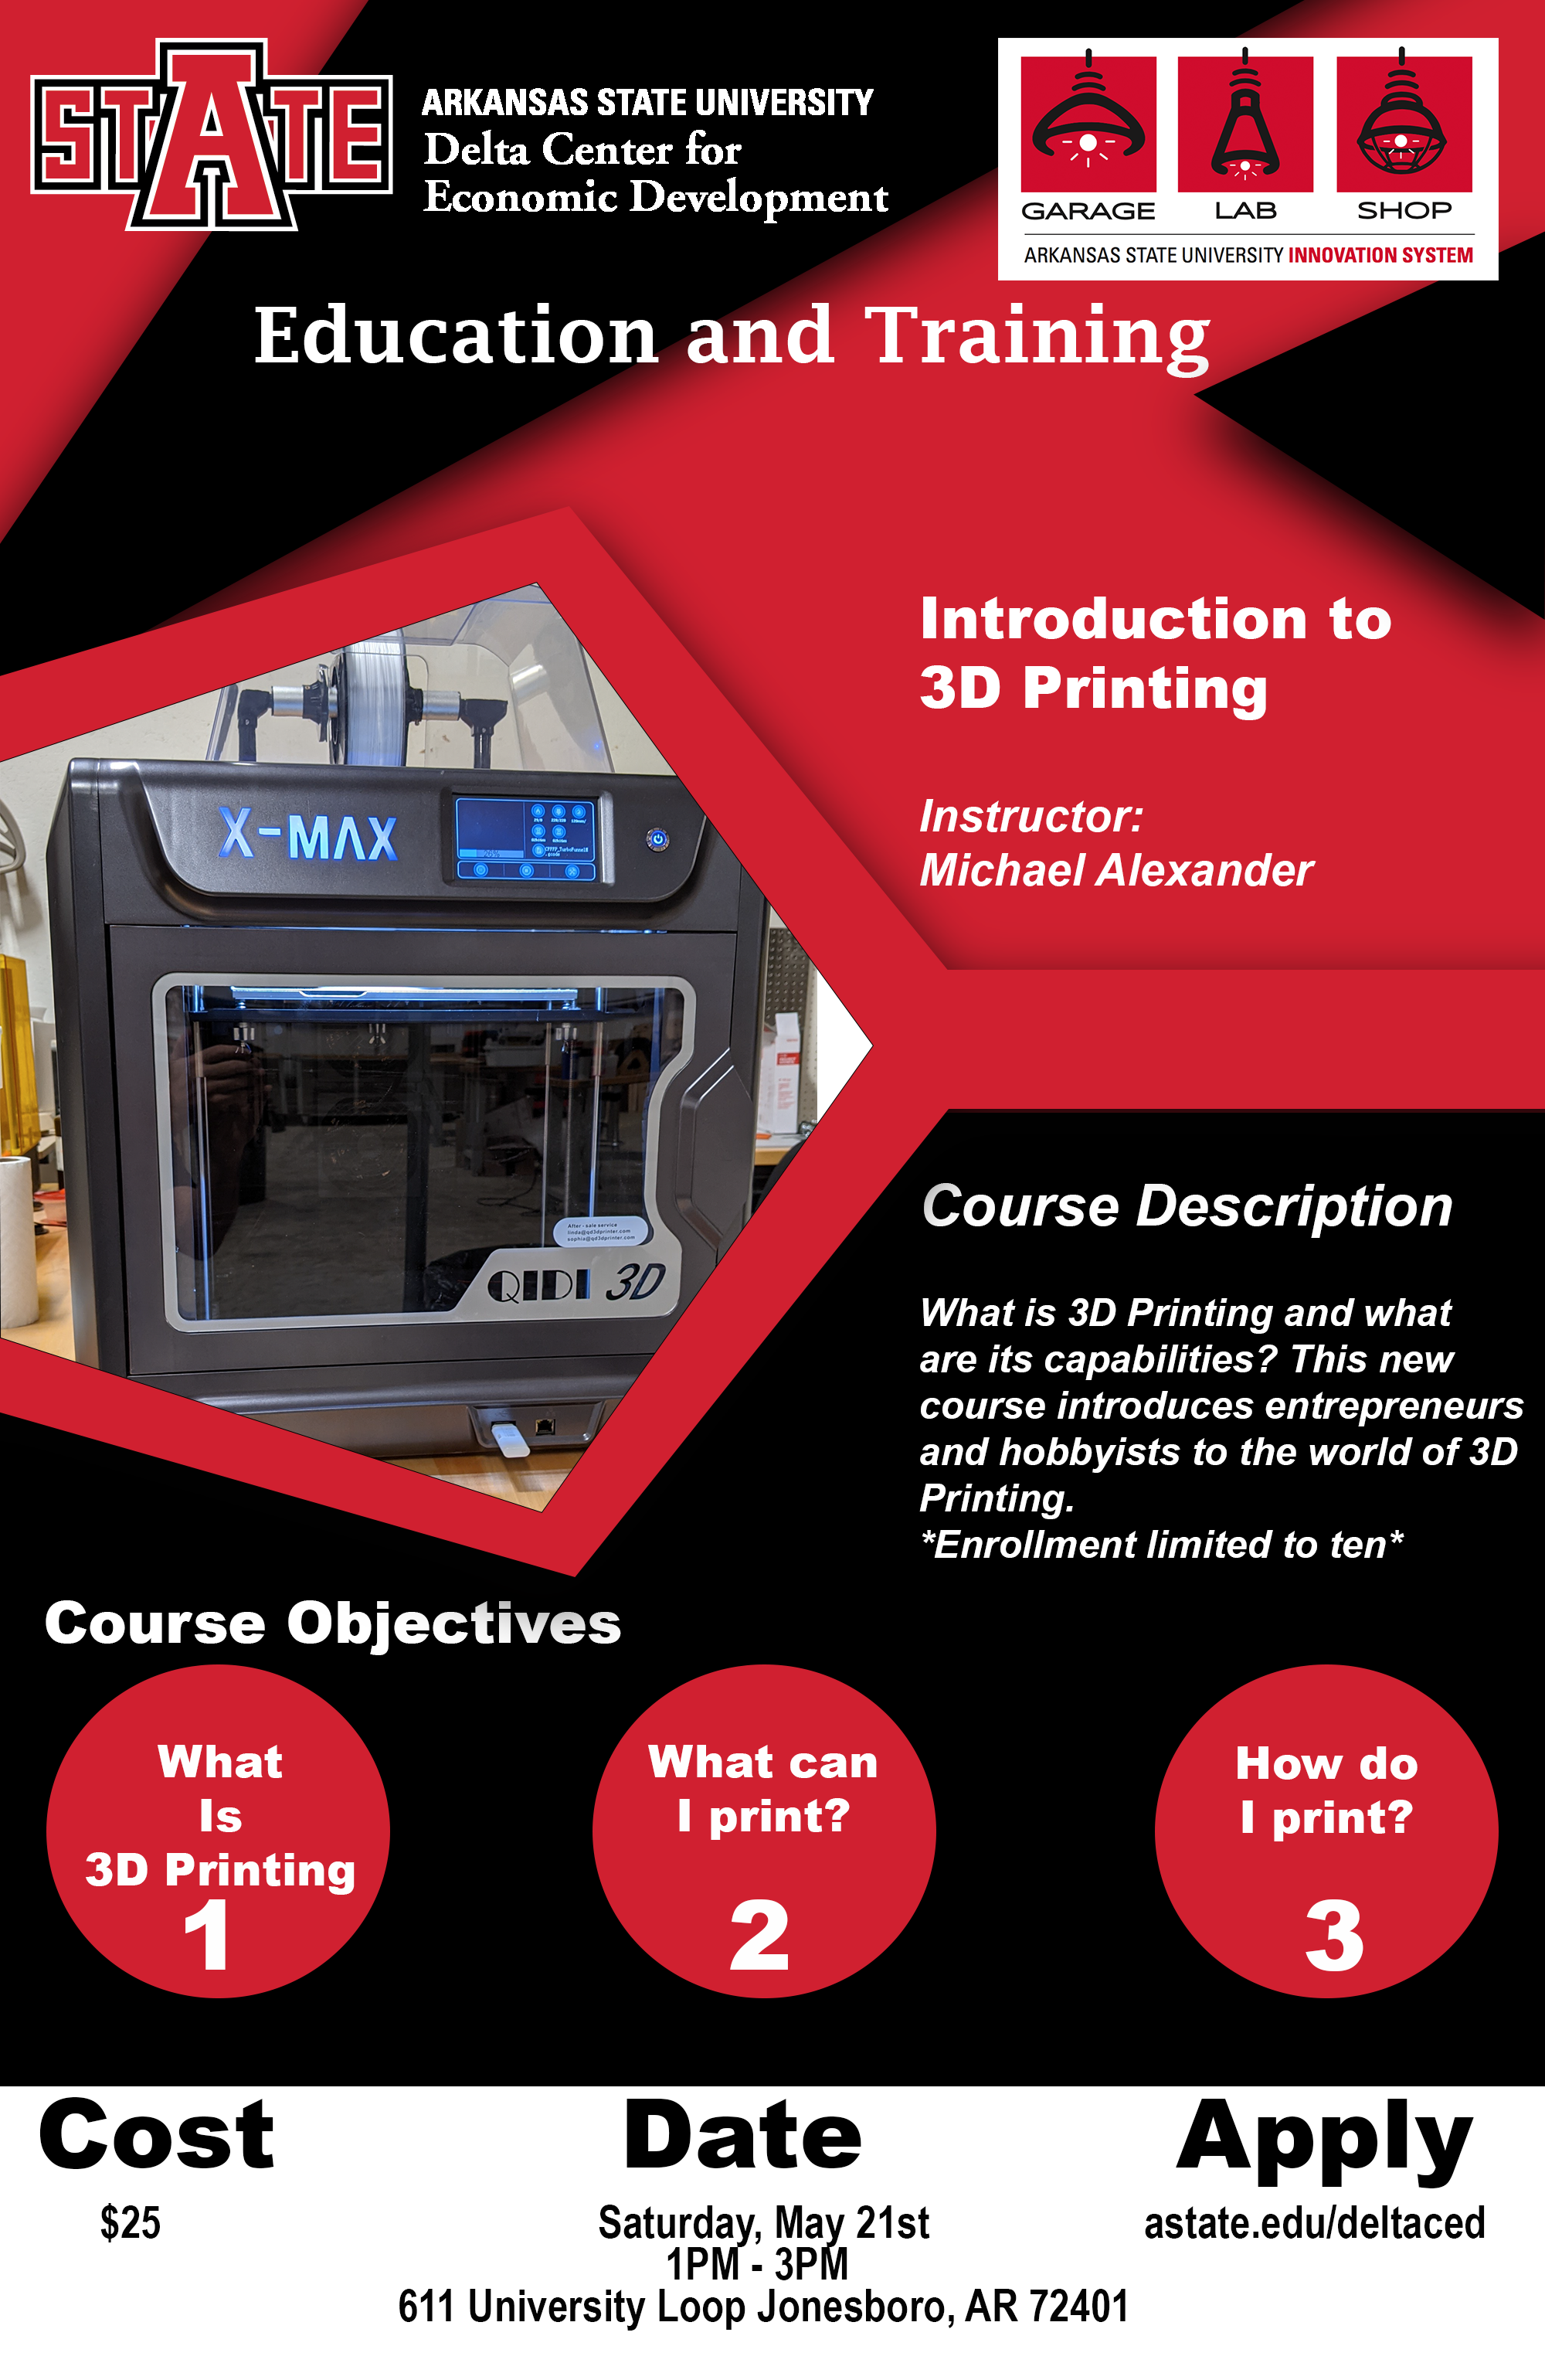 Intro to 3D Printing on May 21st at 1 pm.